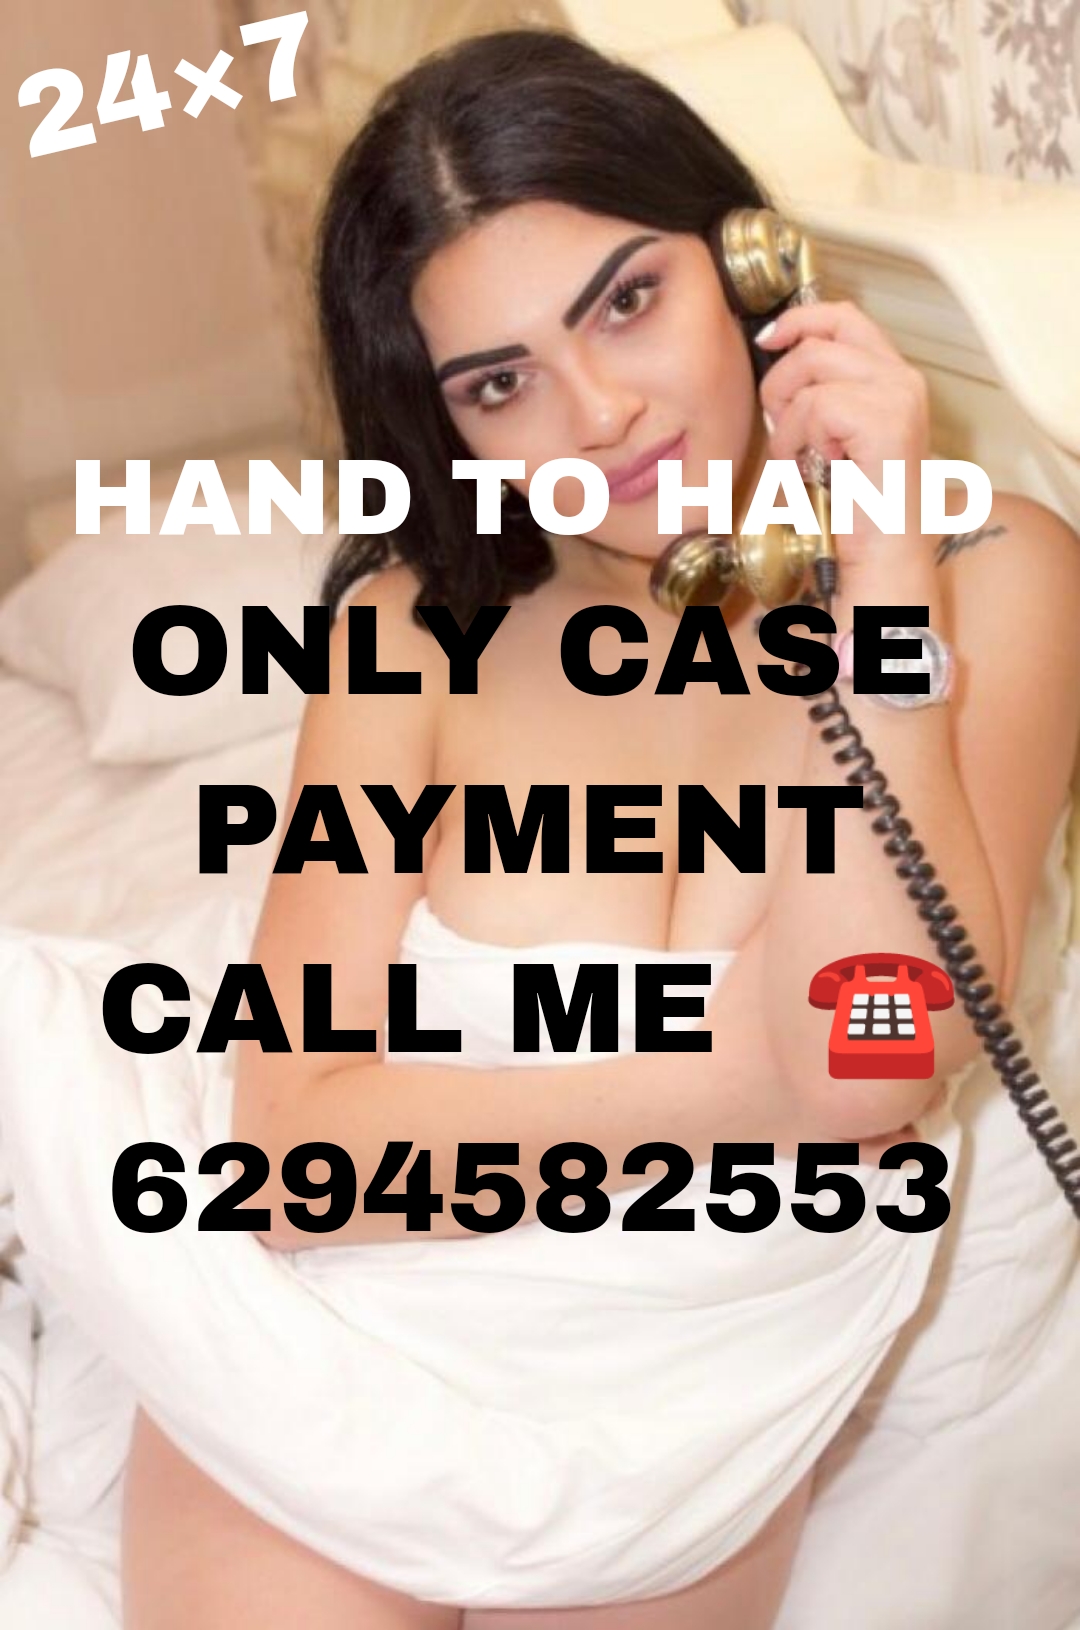 PANVEL SERVICE PROVIDE ONLY CASE PAYMENT 